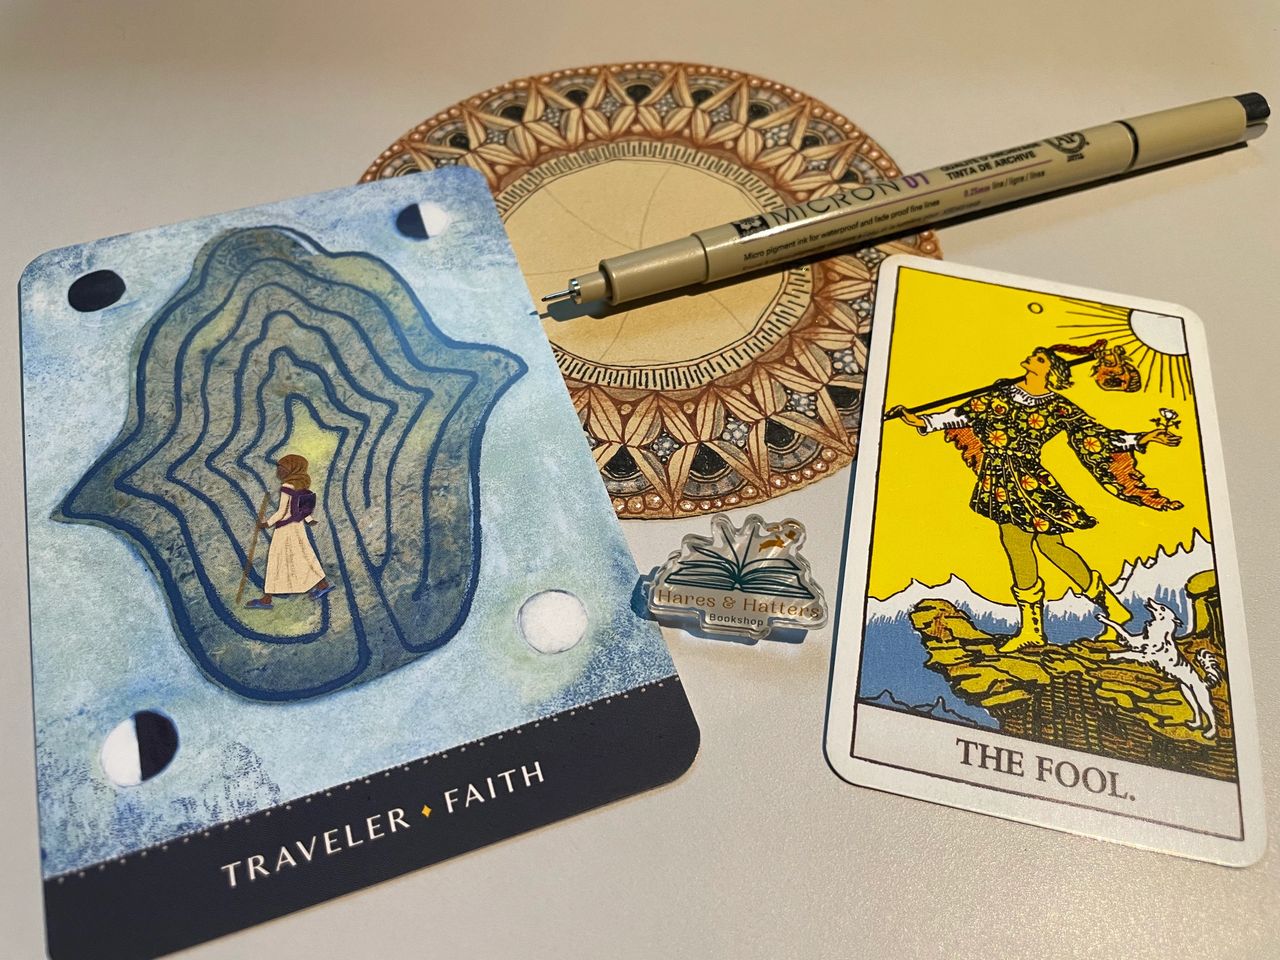 Focus card TRAVELER/FAITH from the Wild & Sacred Divine Feminine Deck, Zentangle drawing by Julie, Pen, Hares & Hatters Bookshop lapel pin, and The Fool.